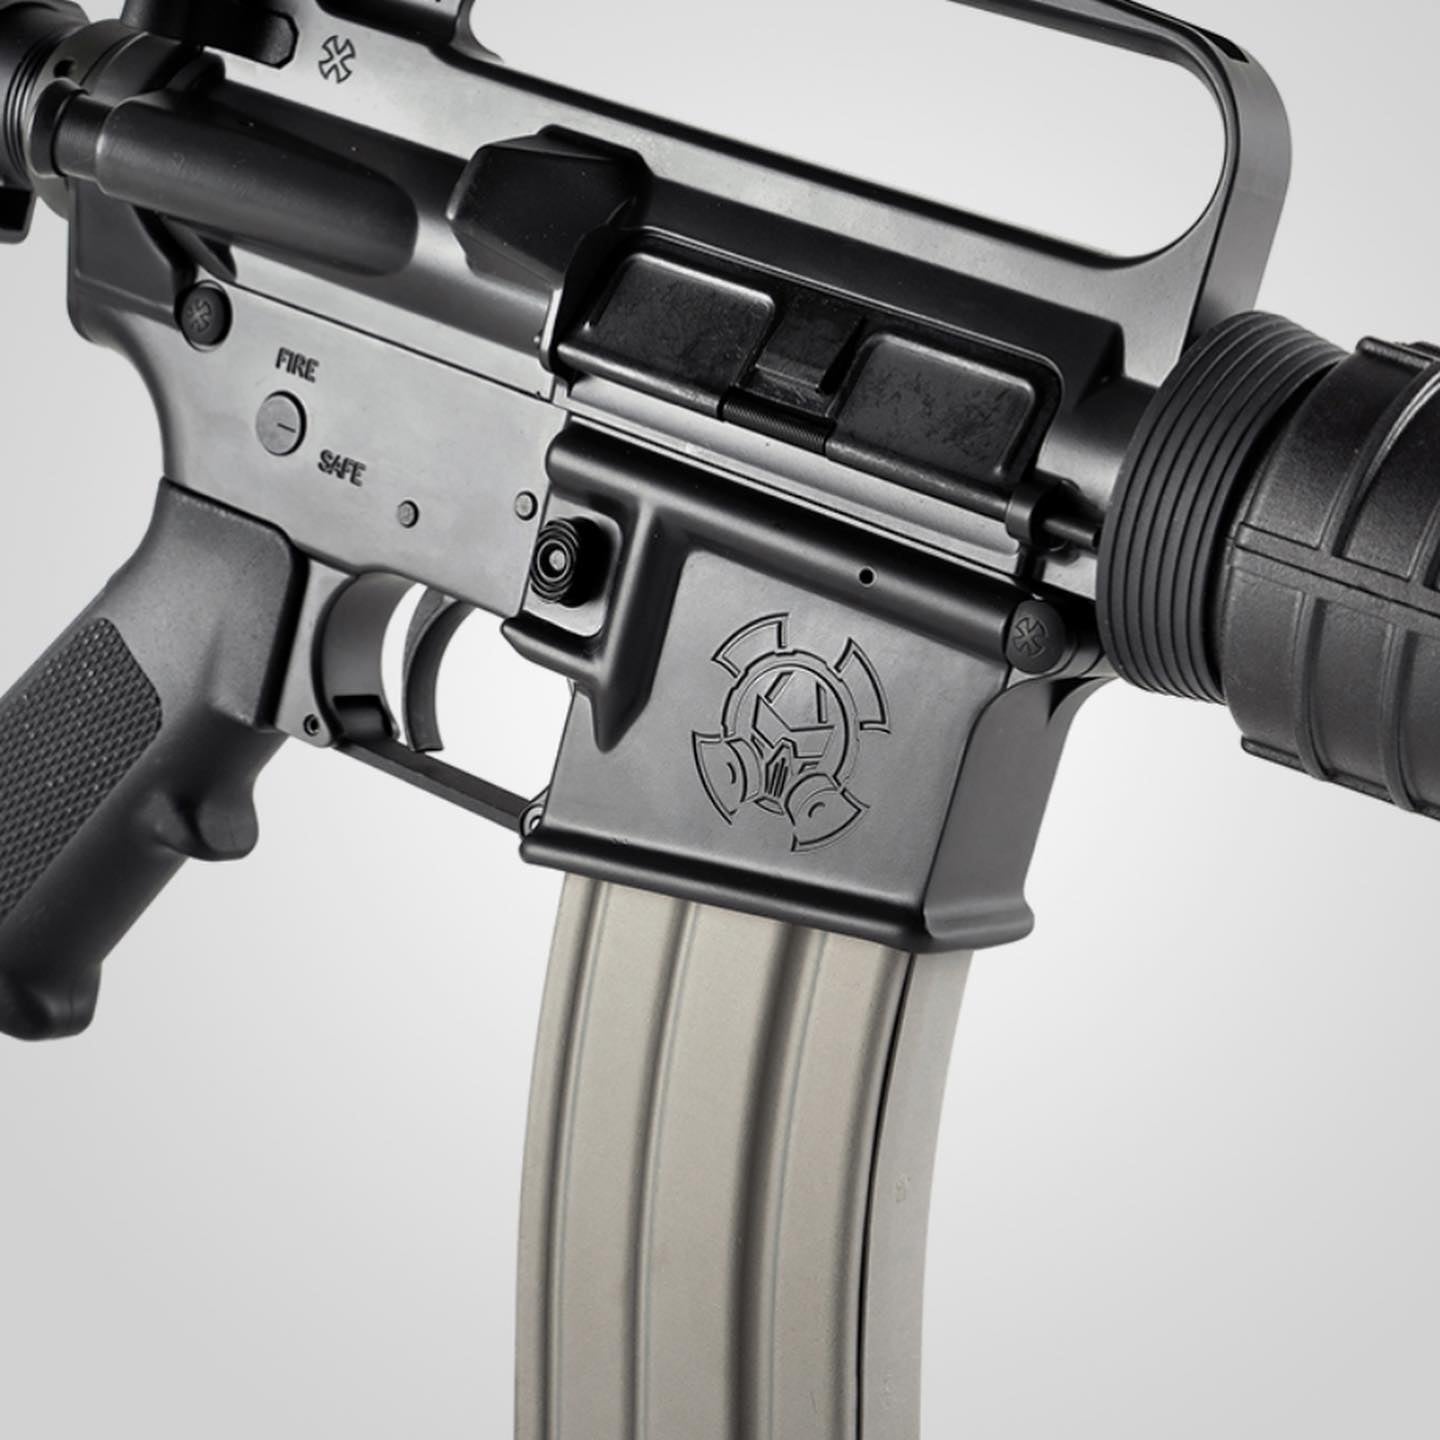 A closeup of the special-edition roll mark, which combines Dead Air and Noveske's logos.